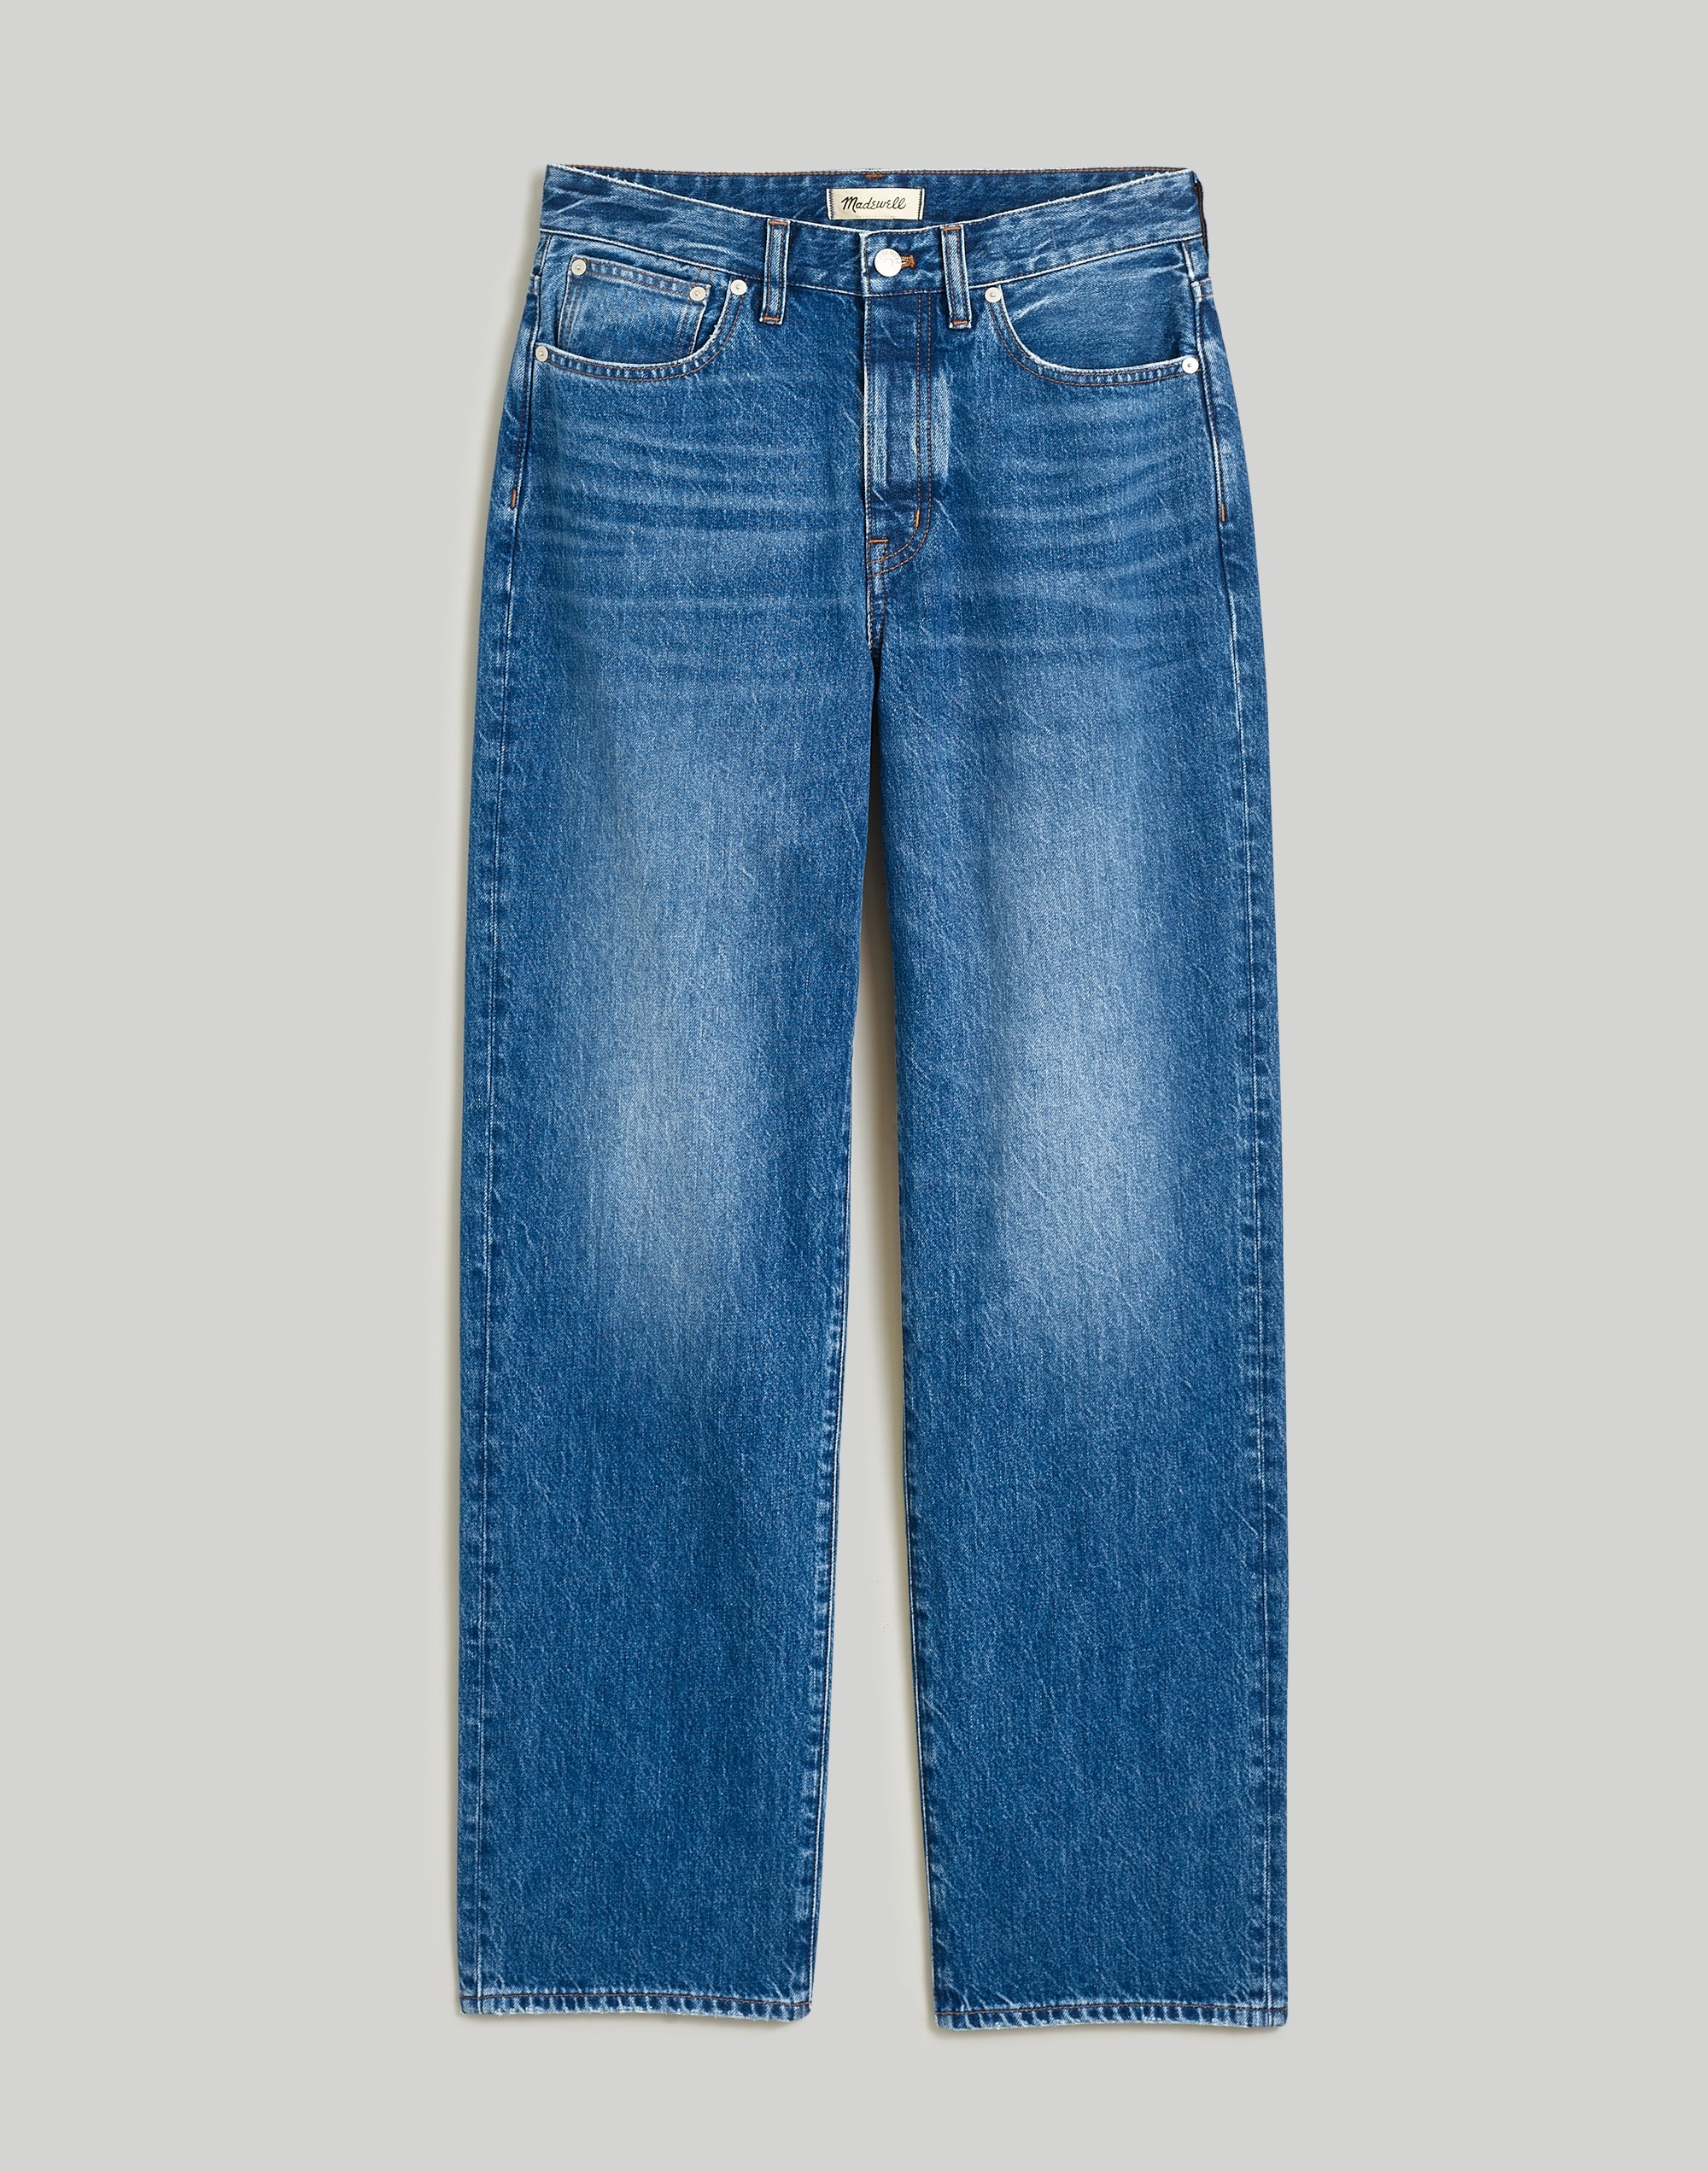 Curvy Low-Slung Straight Jeans in Palmina Wash